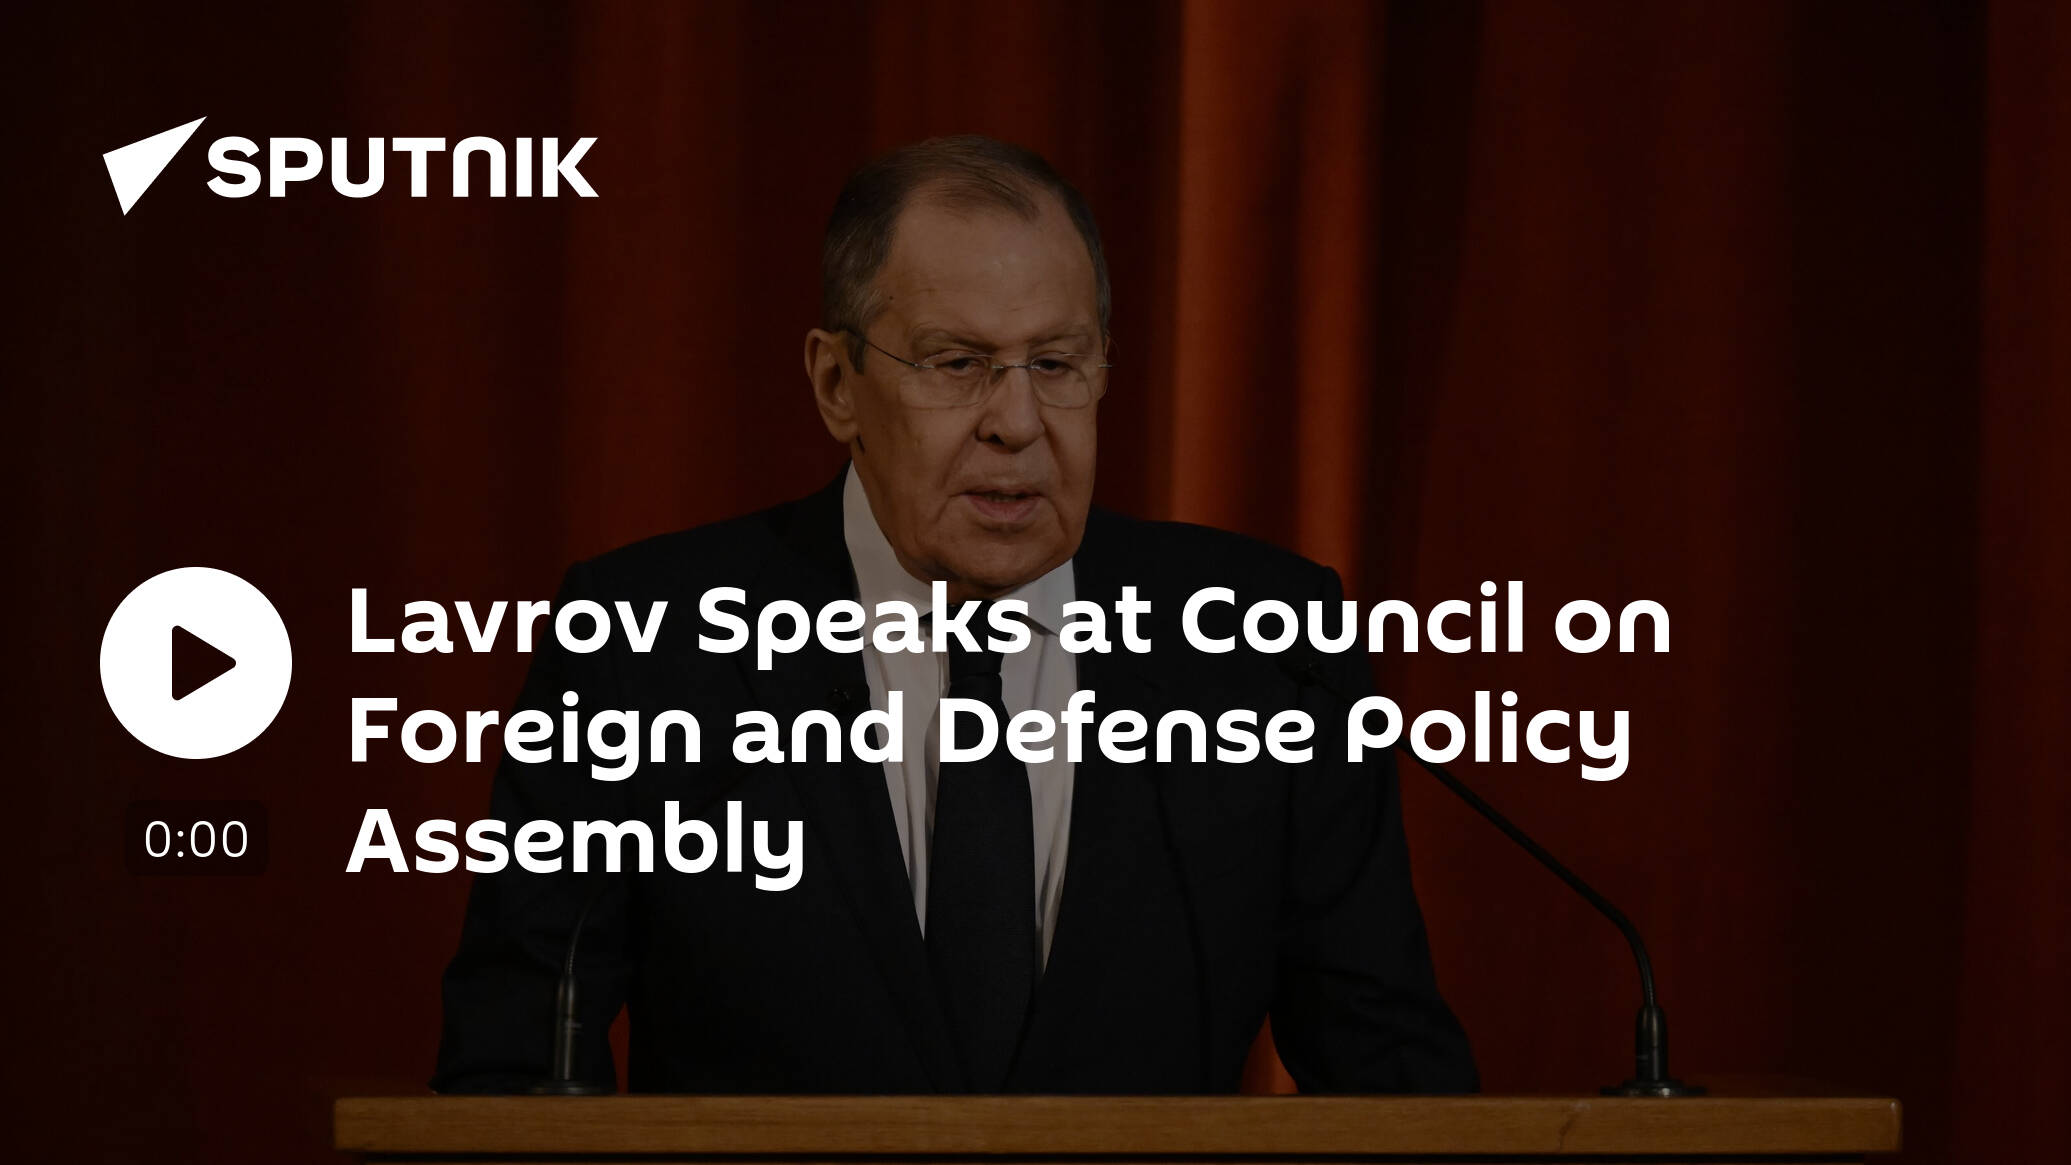 Lavrov Speaks at the Assembly of the Council on Foreign and Defense Policy [Video]